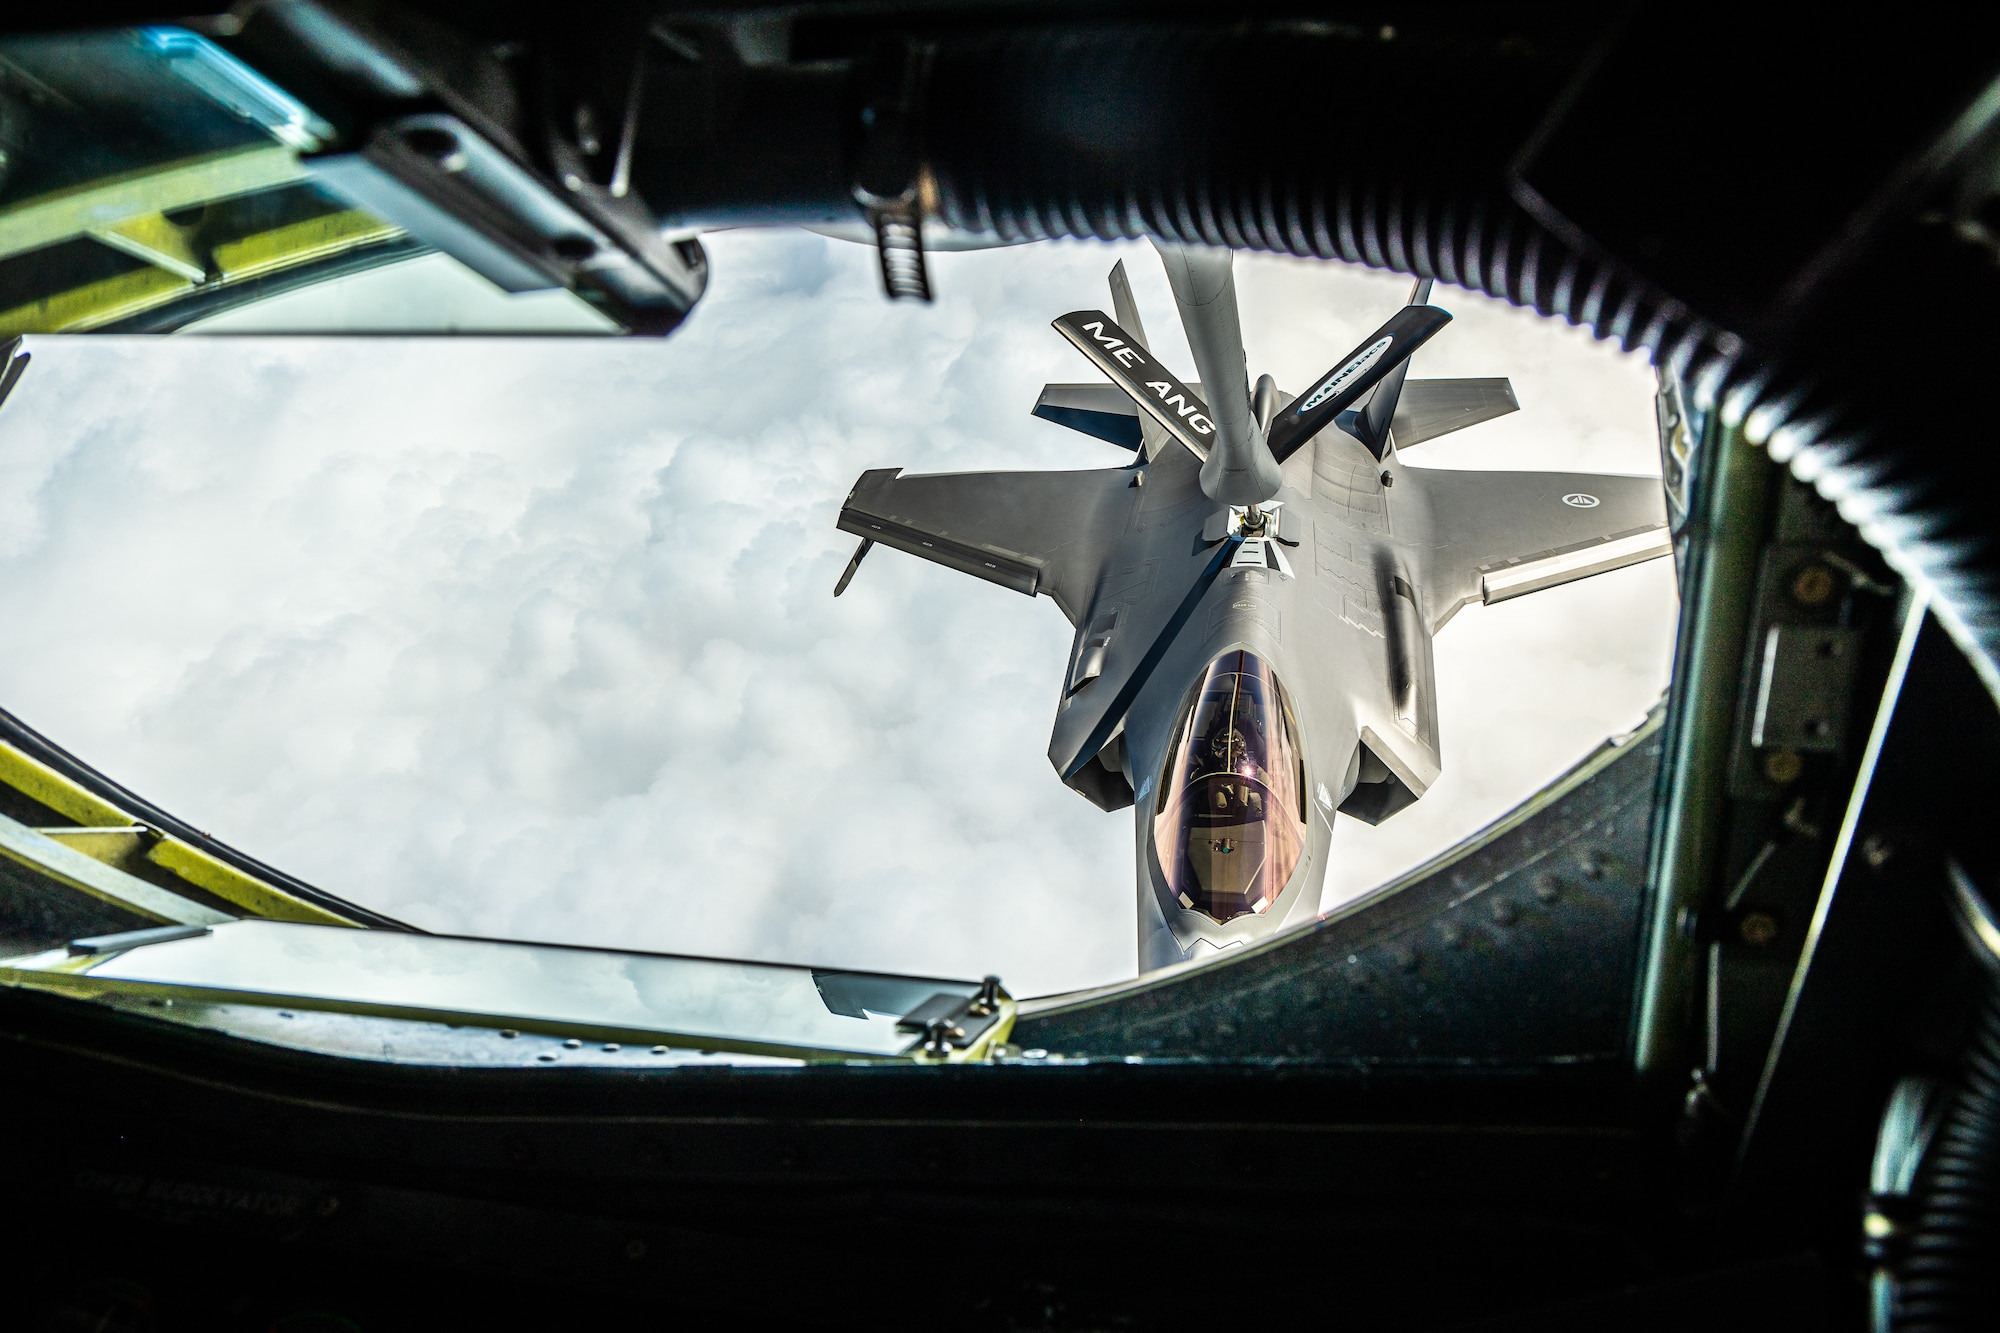 A Norwegian F-35 Lightning II receives fuel from a MAINEiac KC-135 Stratotanker above the Arctic Circle, May 29, 2023. The crews are taking part in Arctic Challenge Exercise 2023, a live fly exercise that serves to advance arctic security initiatives and enhance interoperability in the increasingly dynamic and contested region.